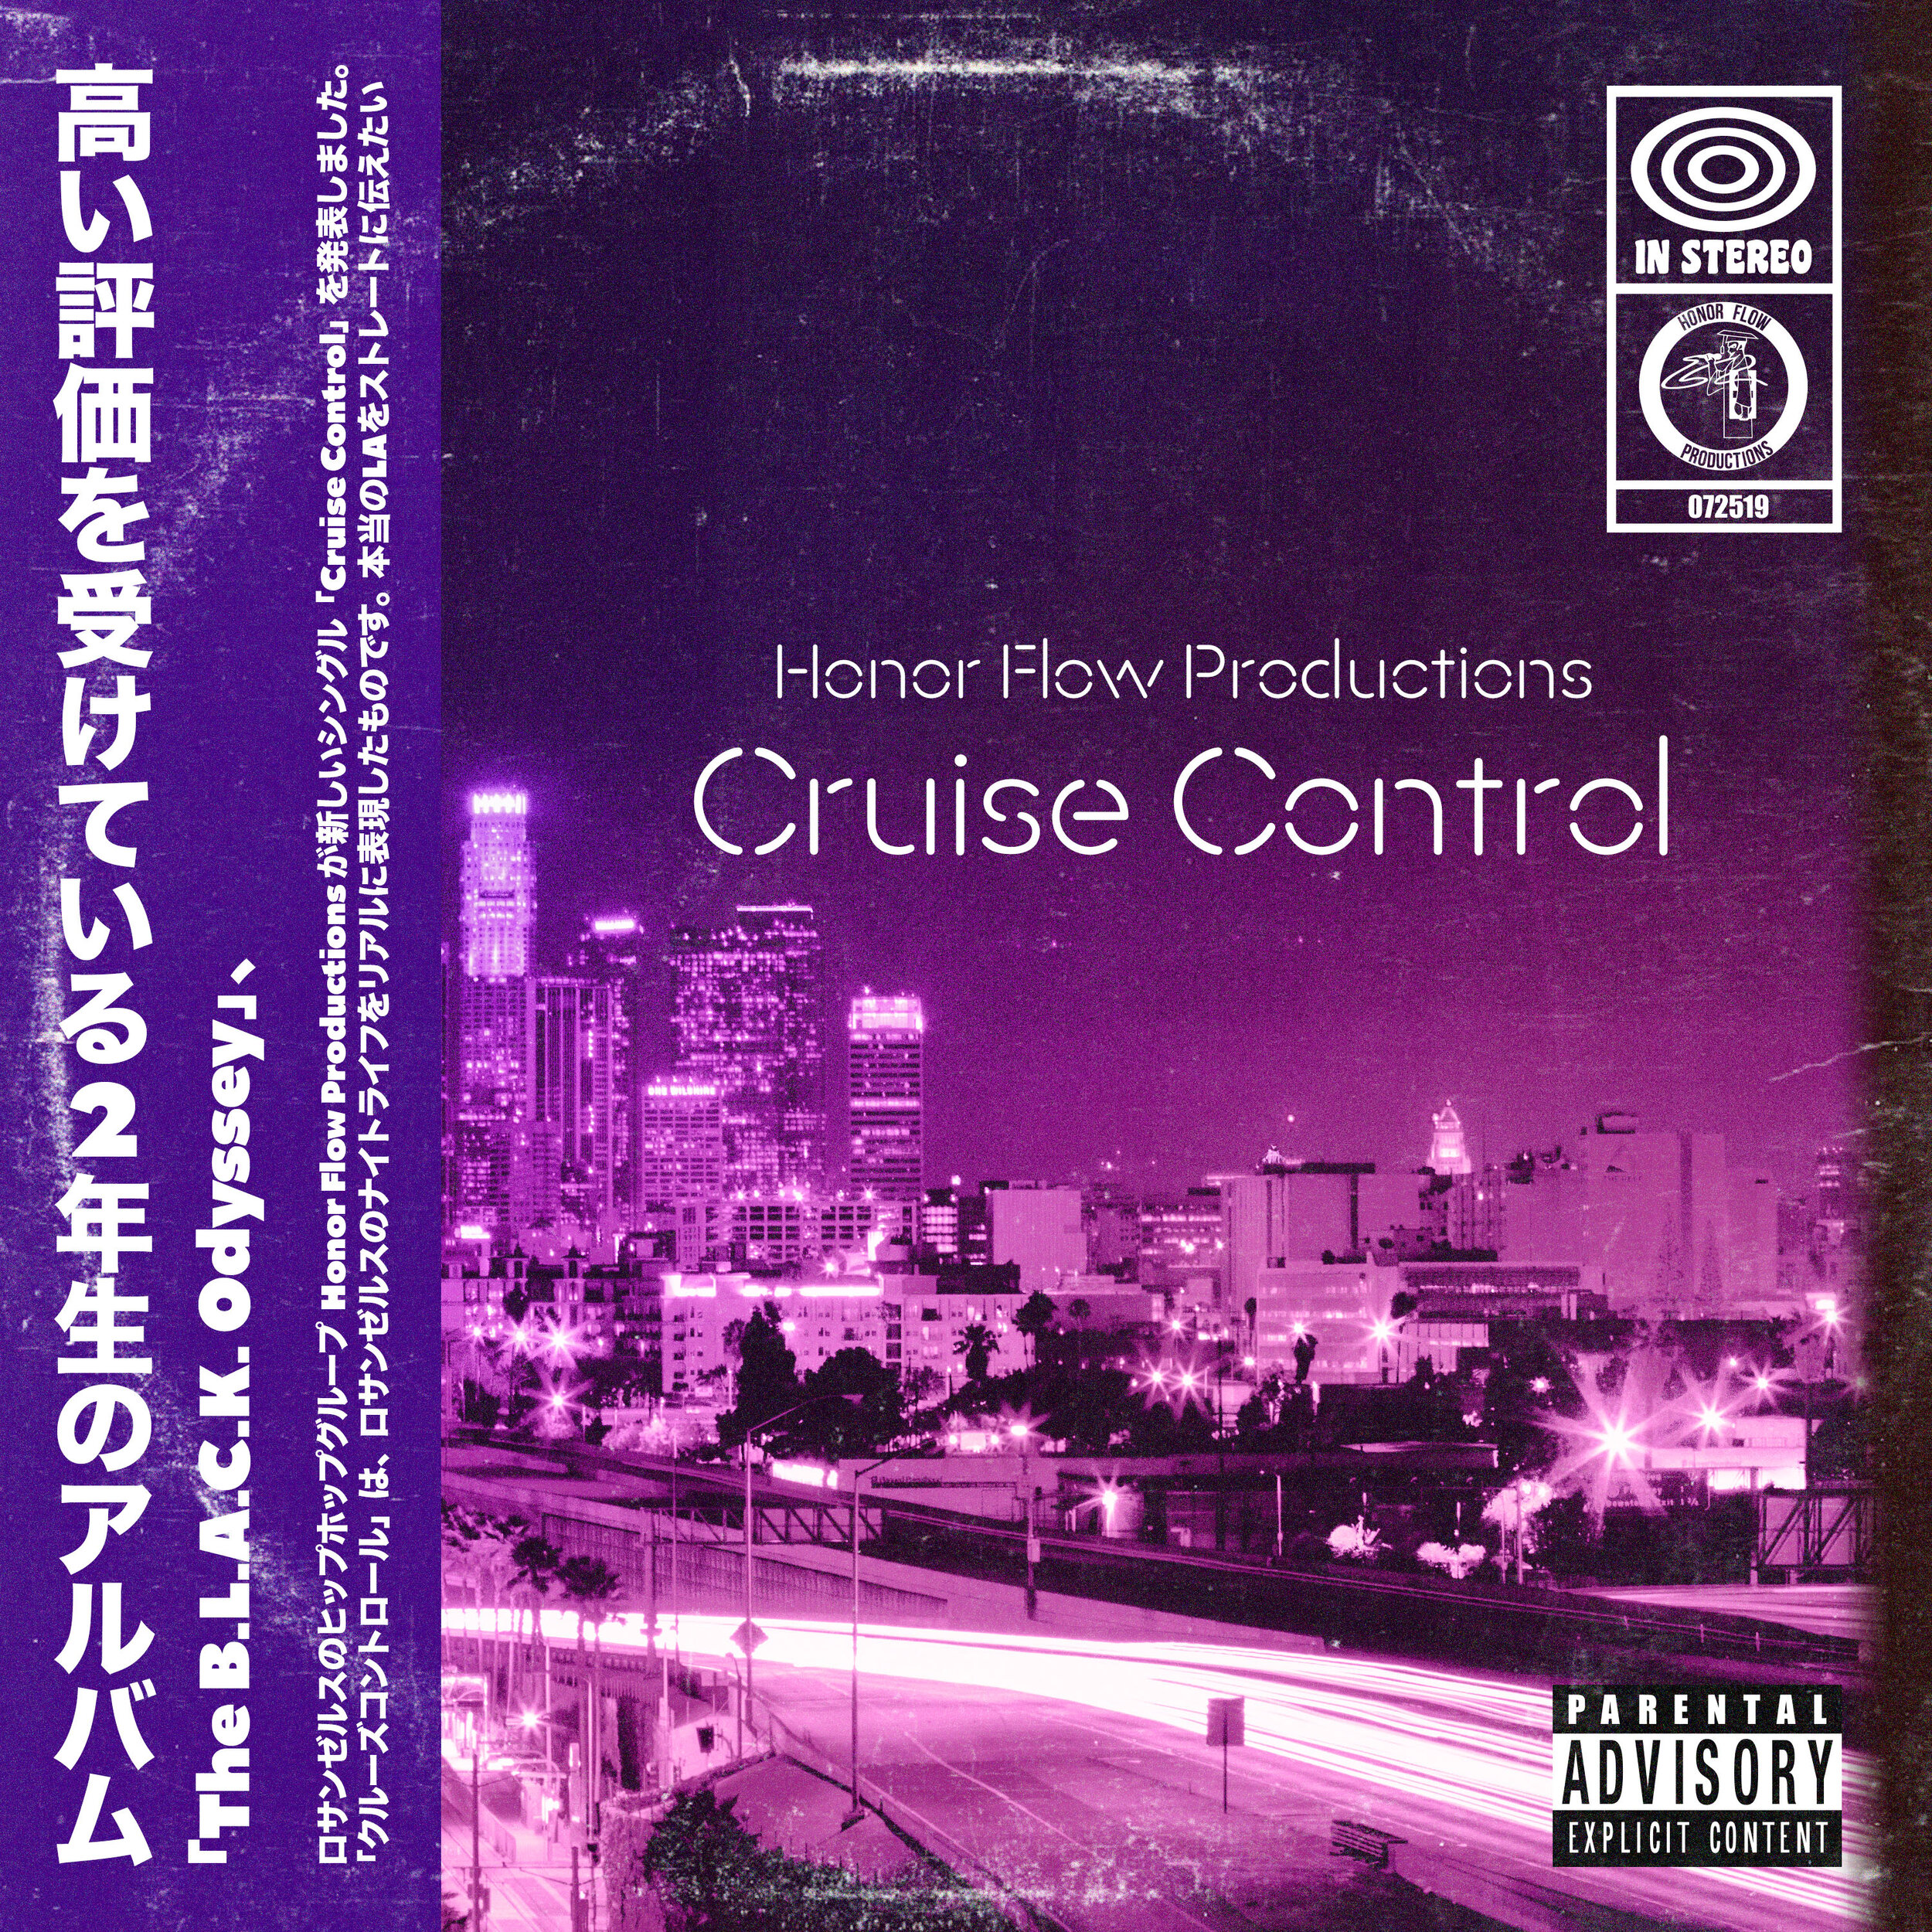 Cruise Control (Front Cover) 3000x3000 (Distrokid).jpg